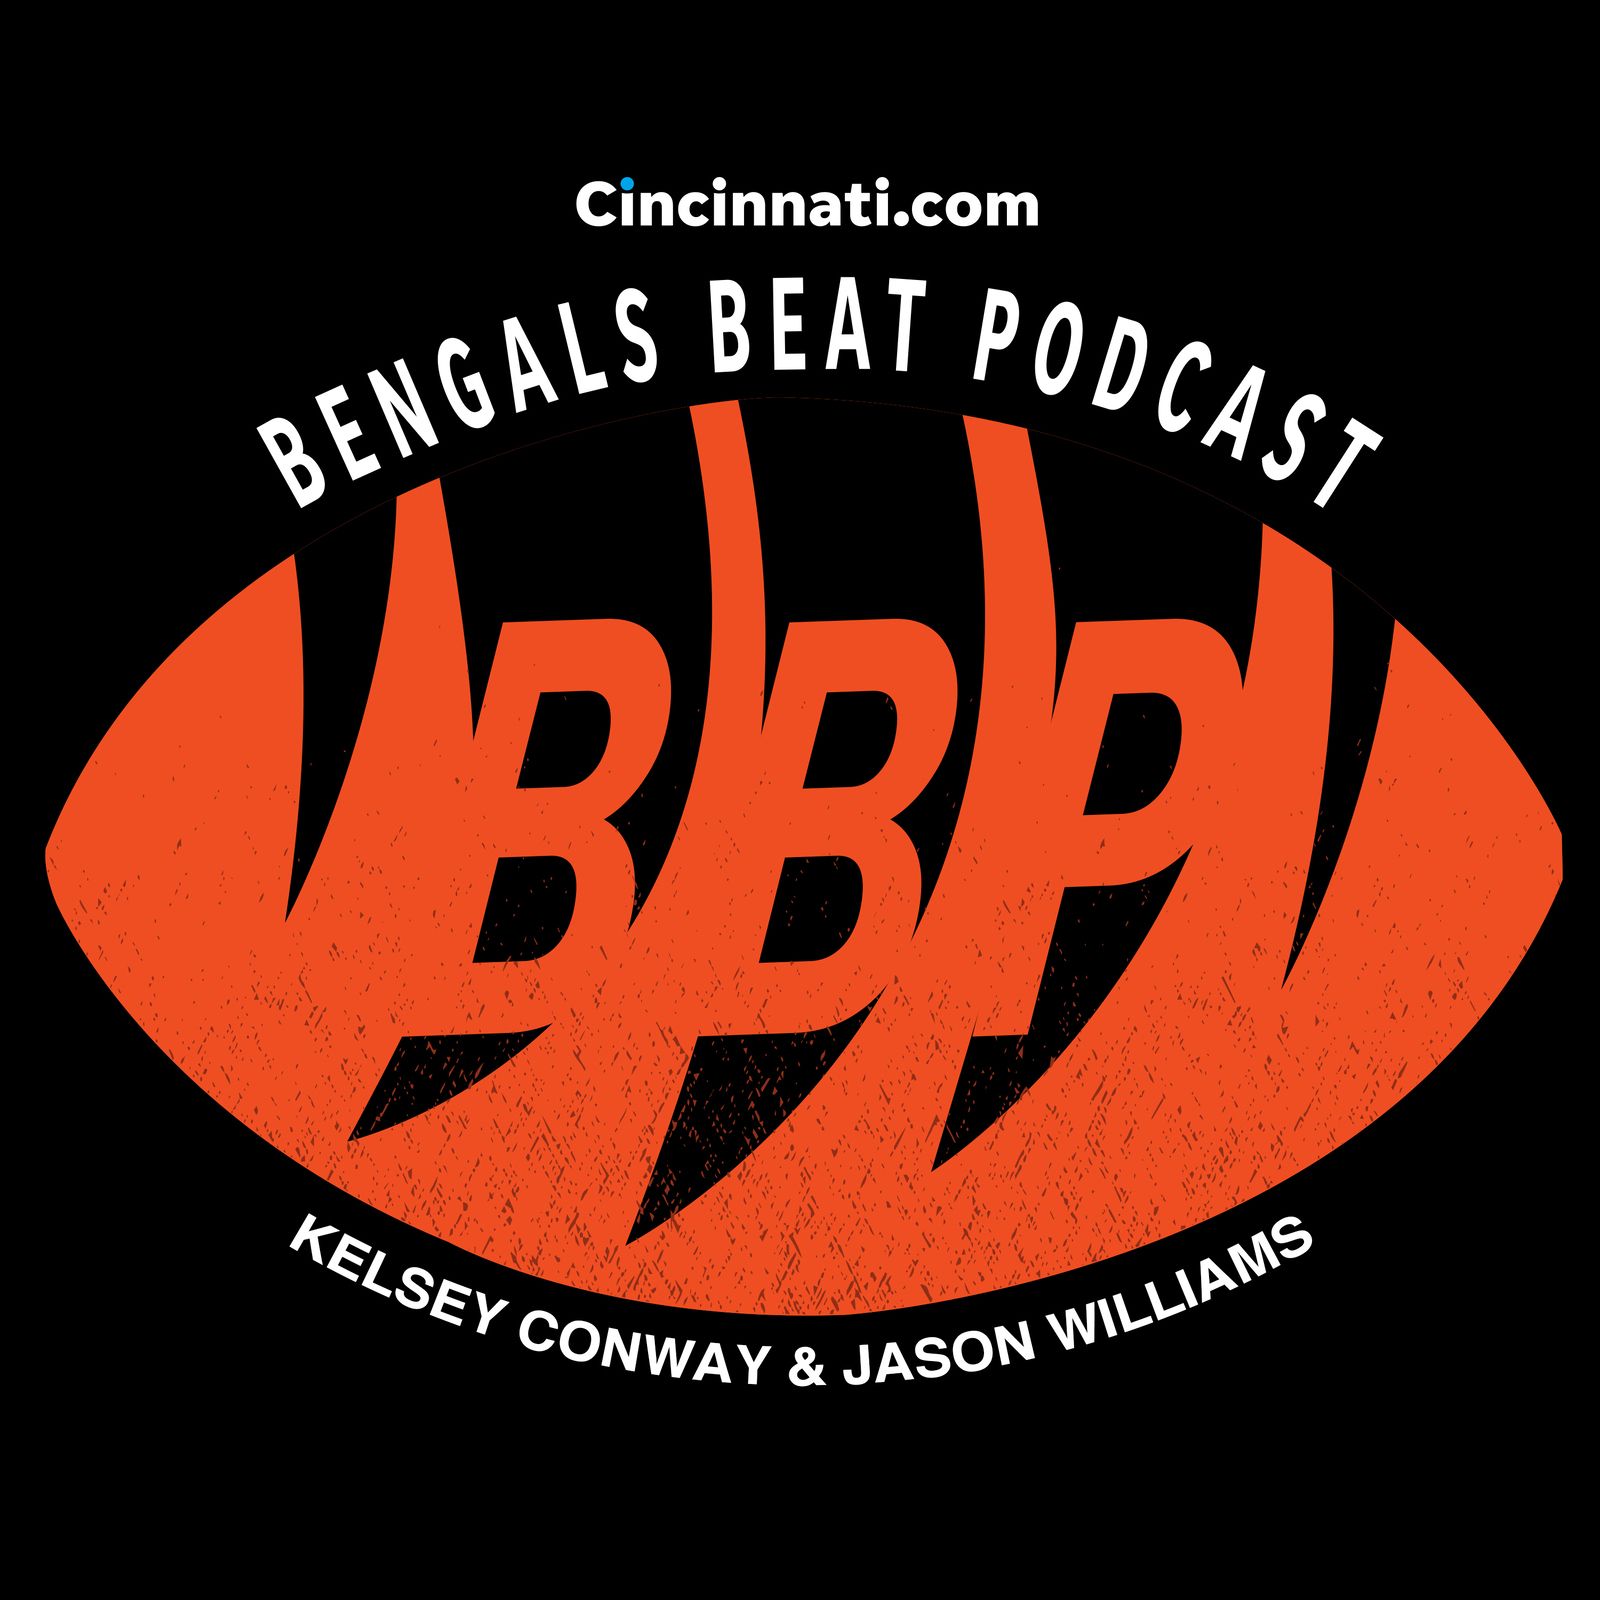 Bengals Beat Podcast: Live with Andrew Whitworth